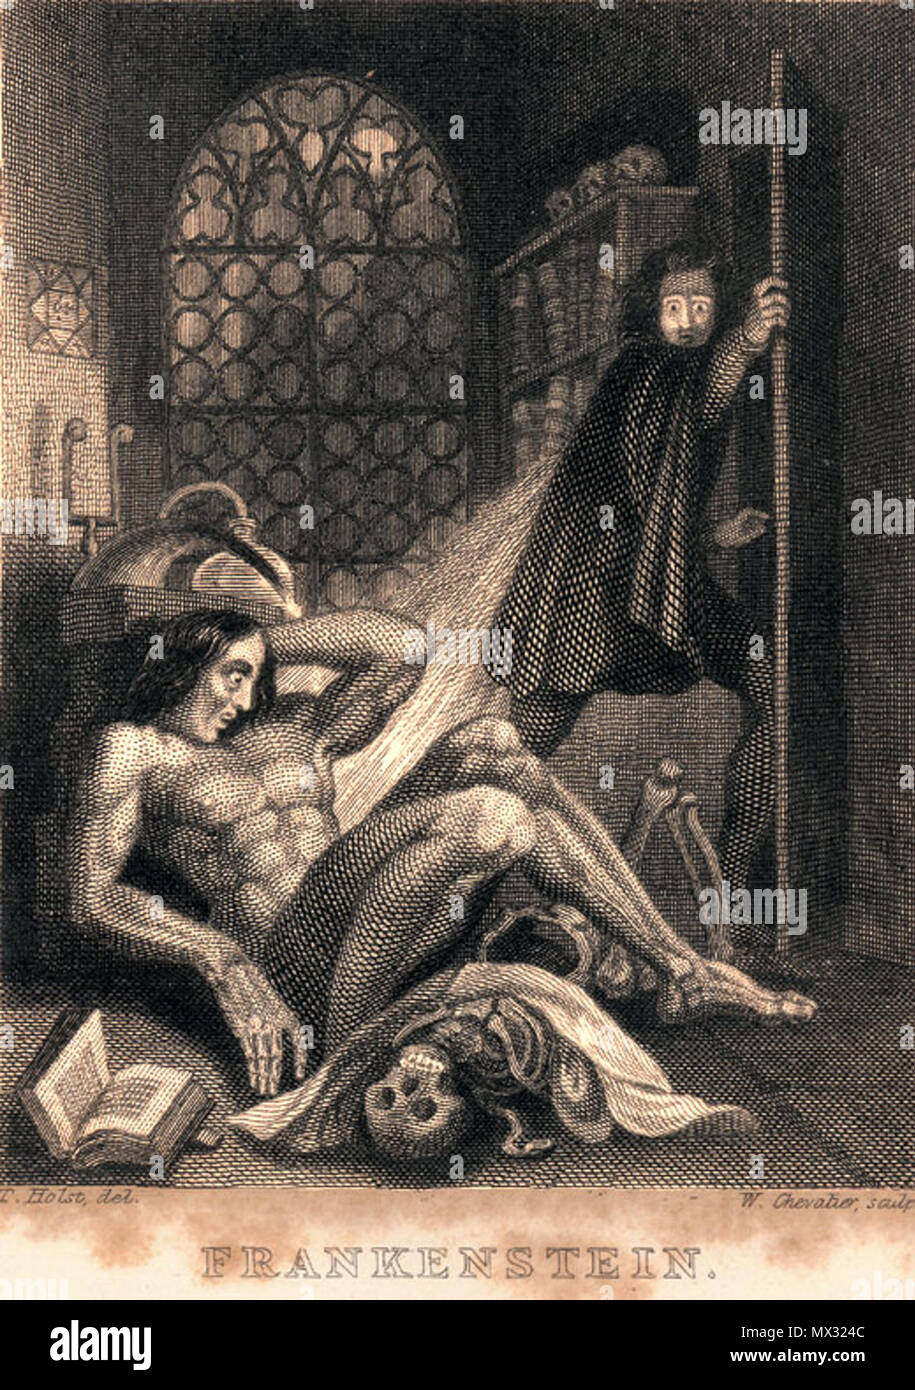 . English: Frontispiece to Mary Shelley, Frankenstein published by Colburn and Bentley, London 1831 Steel engraving in book 93 x 71 mm . 1831. Theodor von Holst 218 Frankenstein engraved Stock Photo